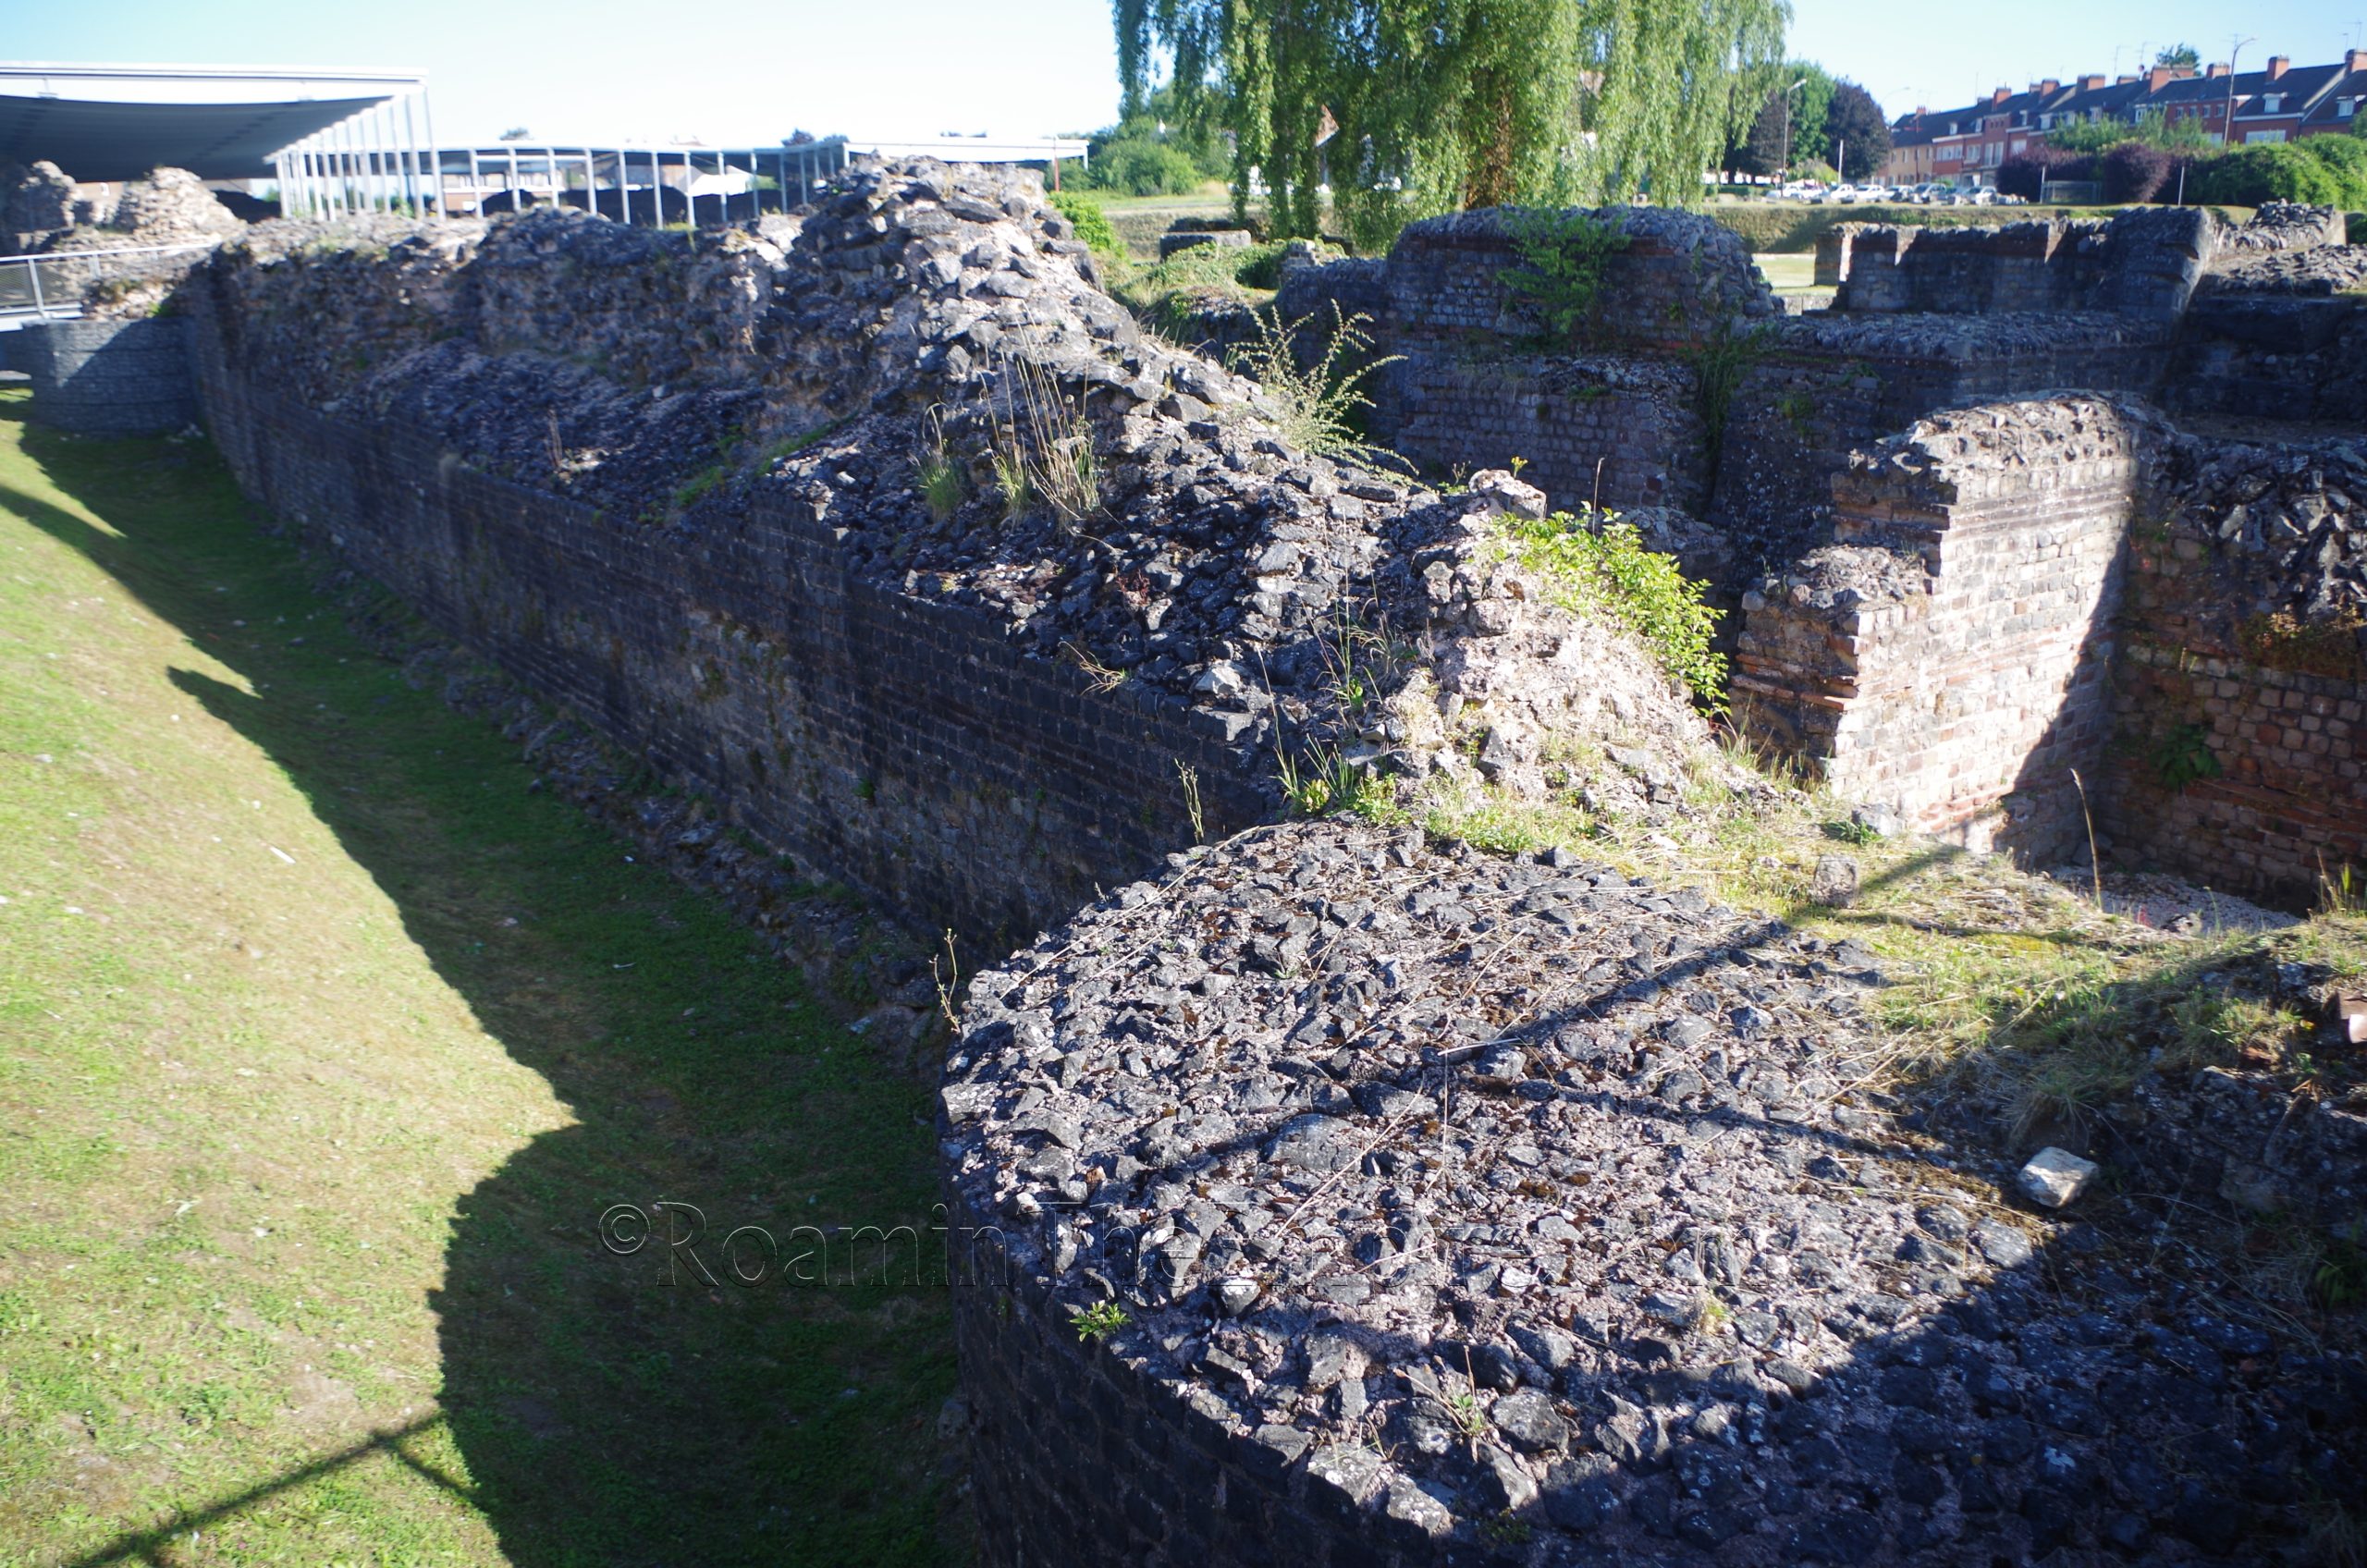 Remains of the 3rd-4th century walls enclosing the forum.